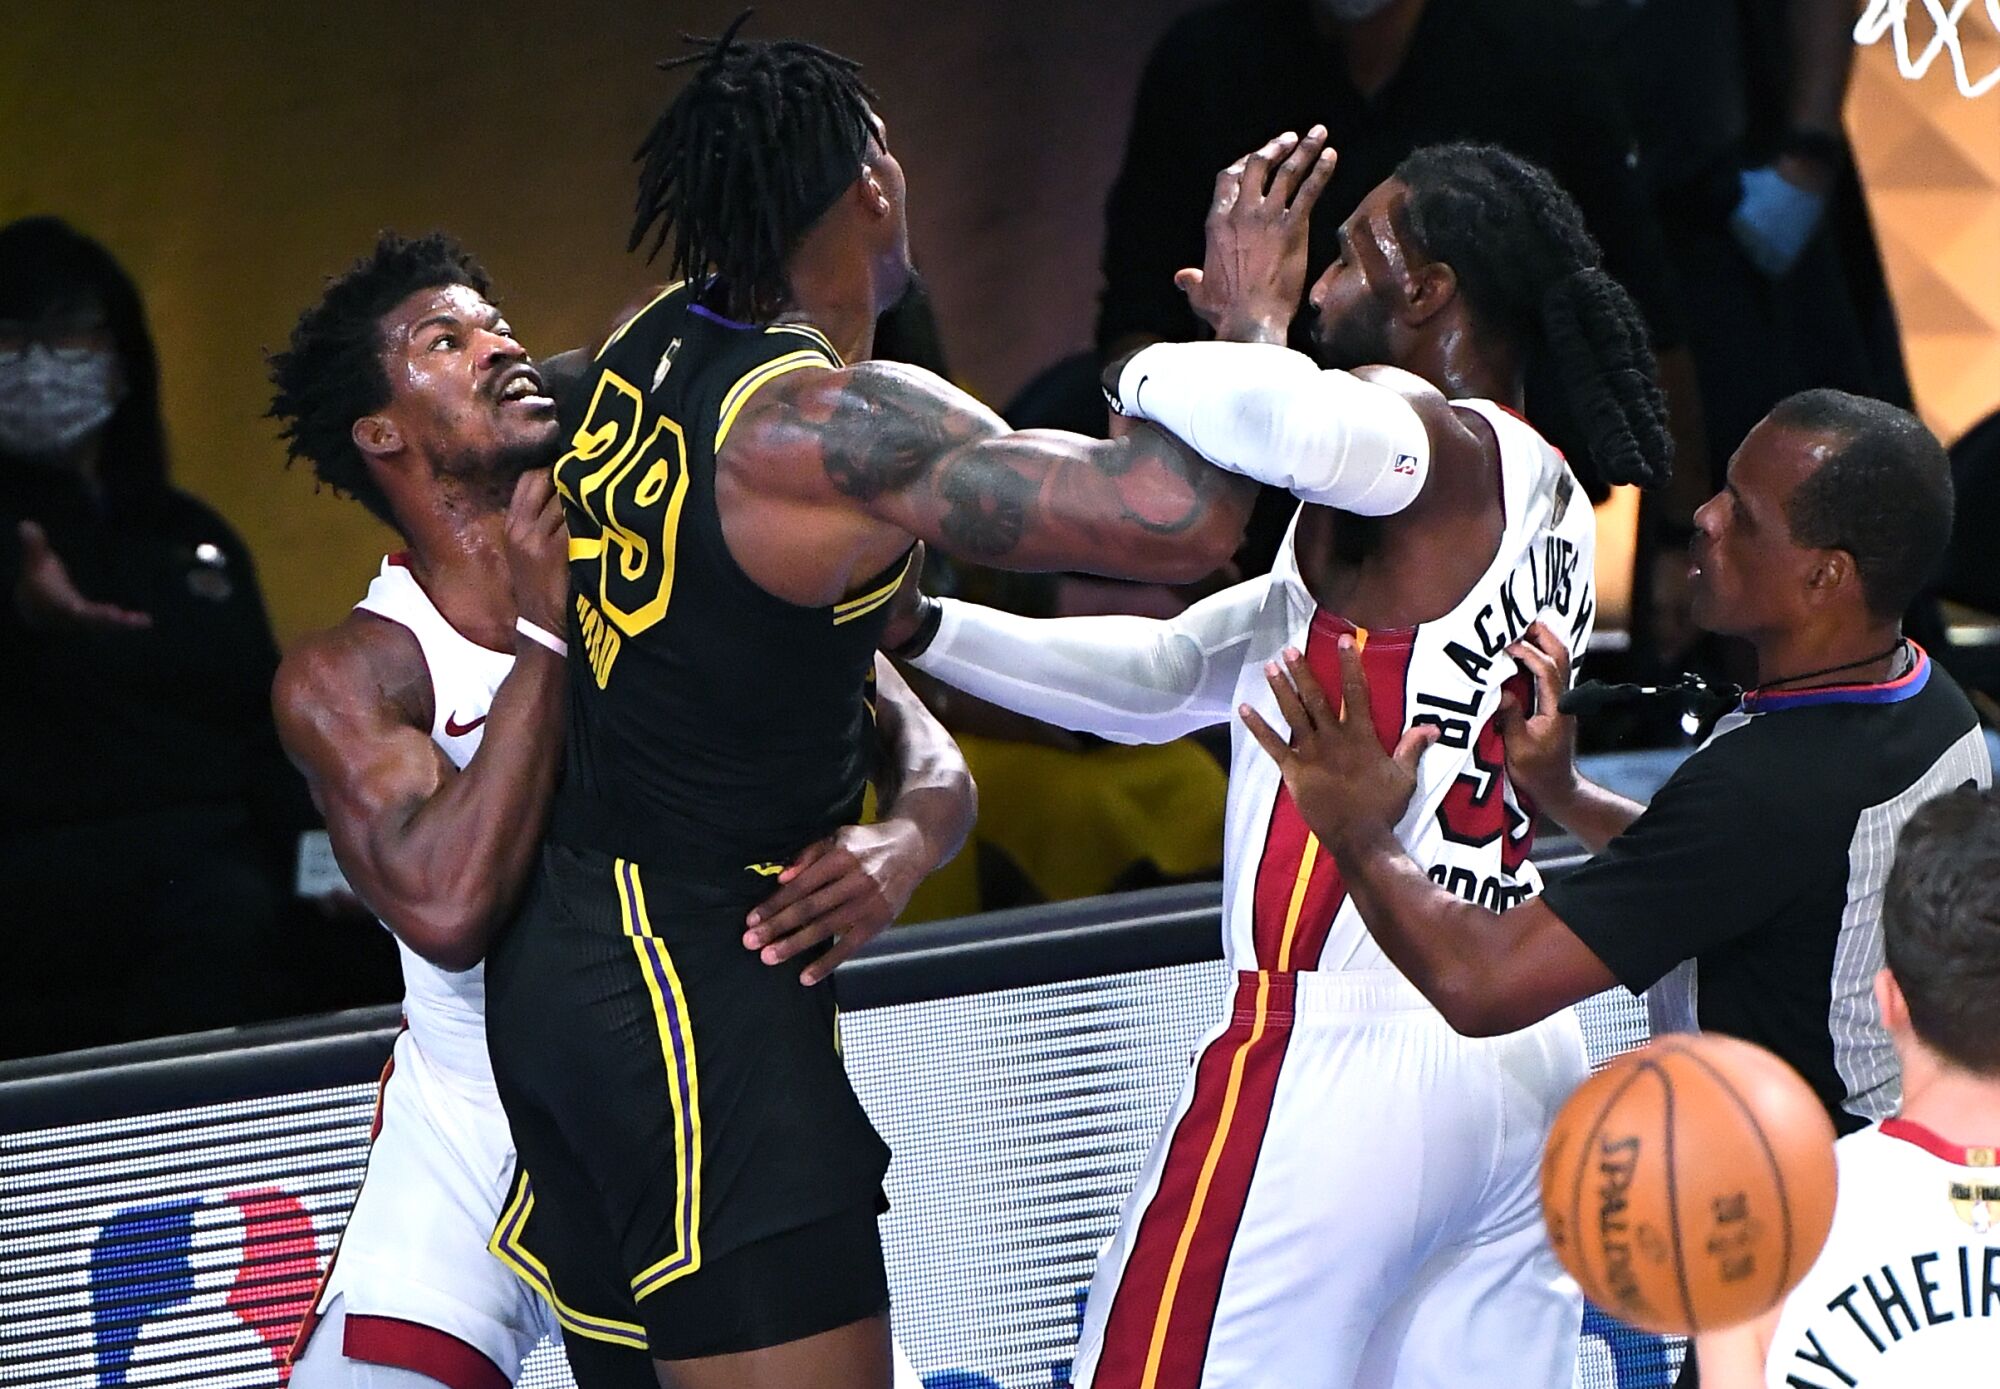 Lakers center Dwight Howard is held back by Heat forward Jimmy Butler while getting into a confrontation with Jae Crowder.